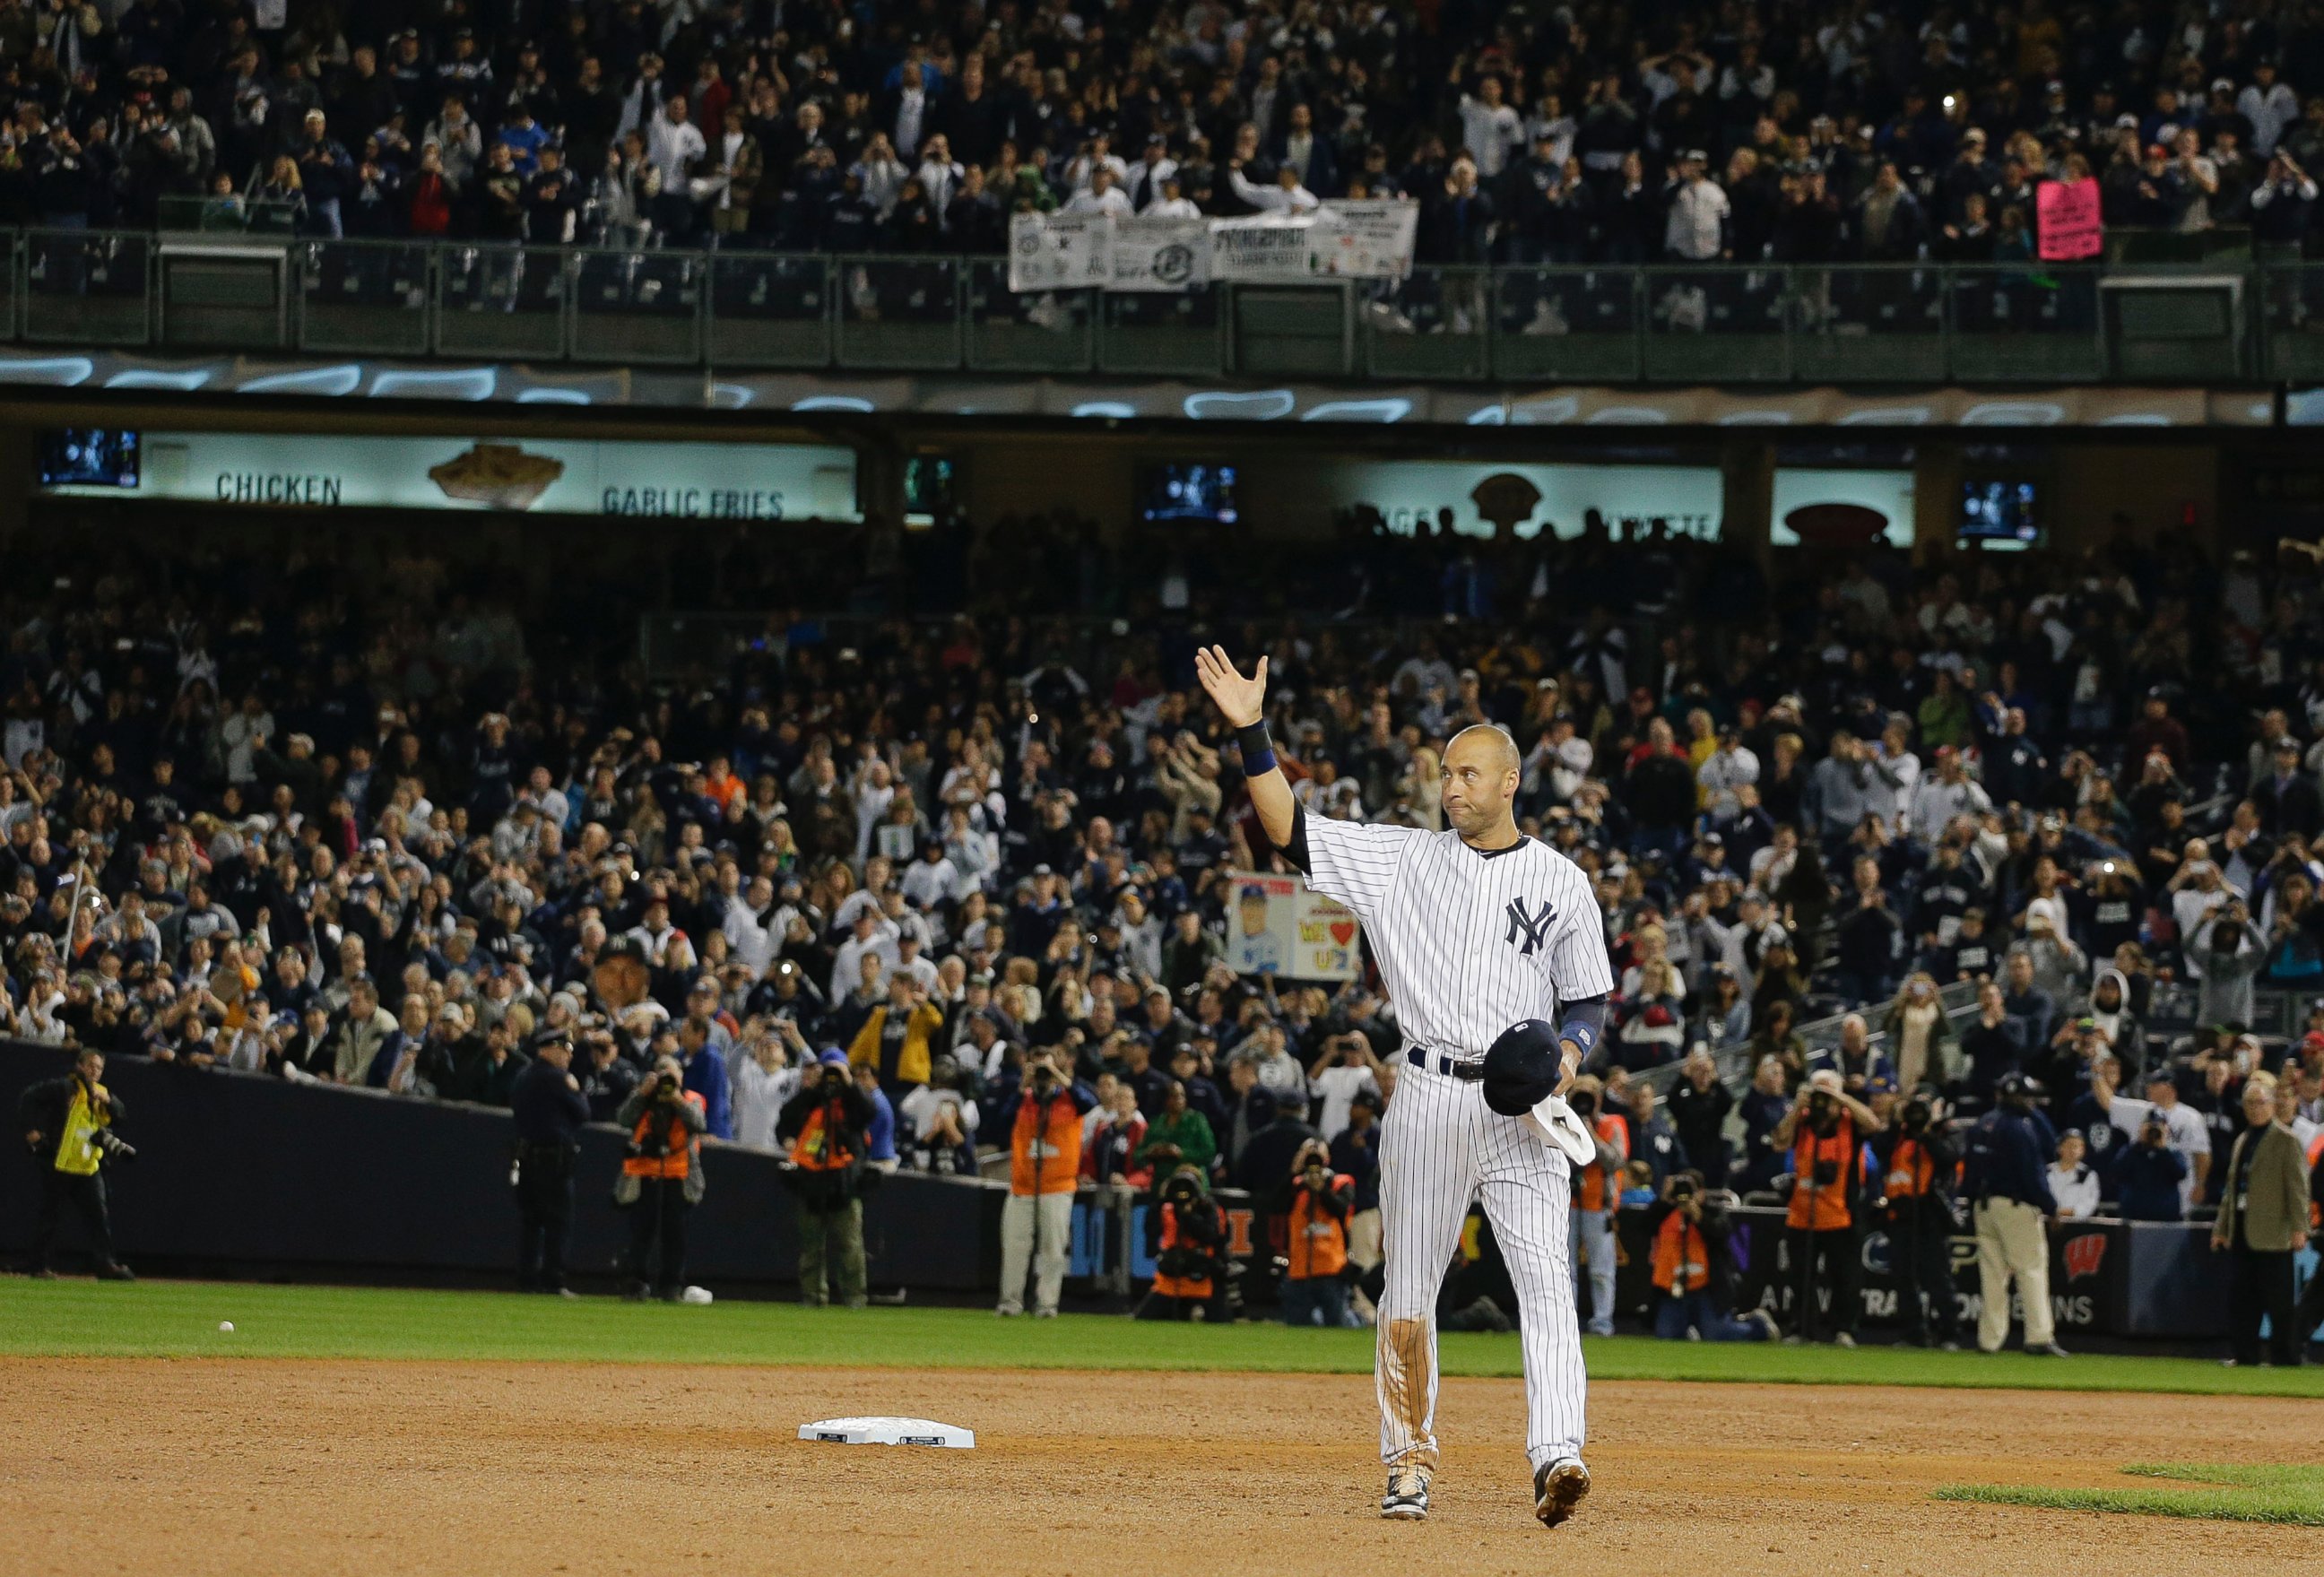 New York Yankees shortstop Derek Jeter waves to fans as he walks around the infield after driving in the winning run against the Baltimore Orioles in the ninth inning of a baseball game, Thursday, Sept. 25, 2014, in New York. 